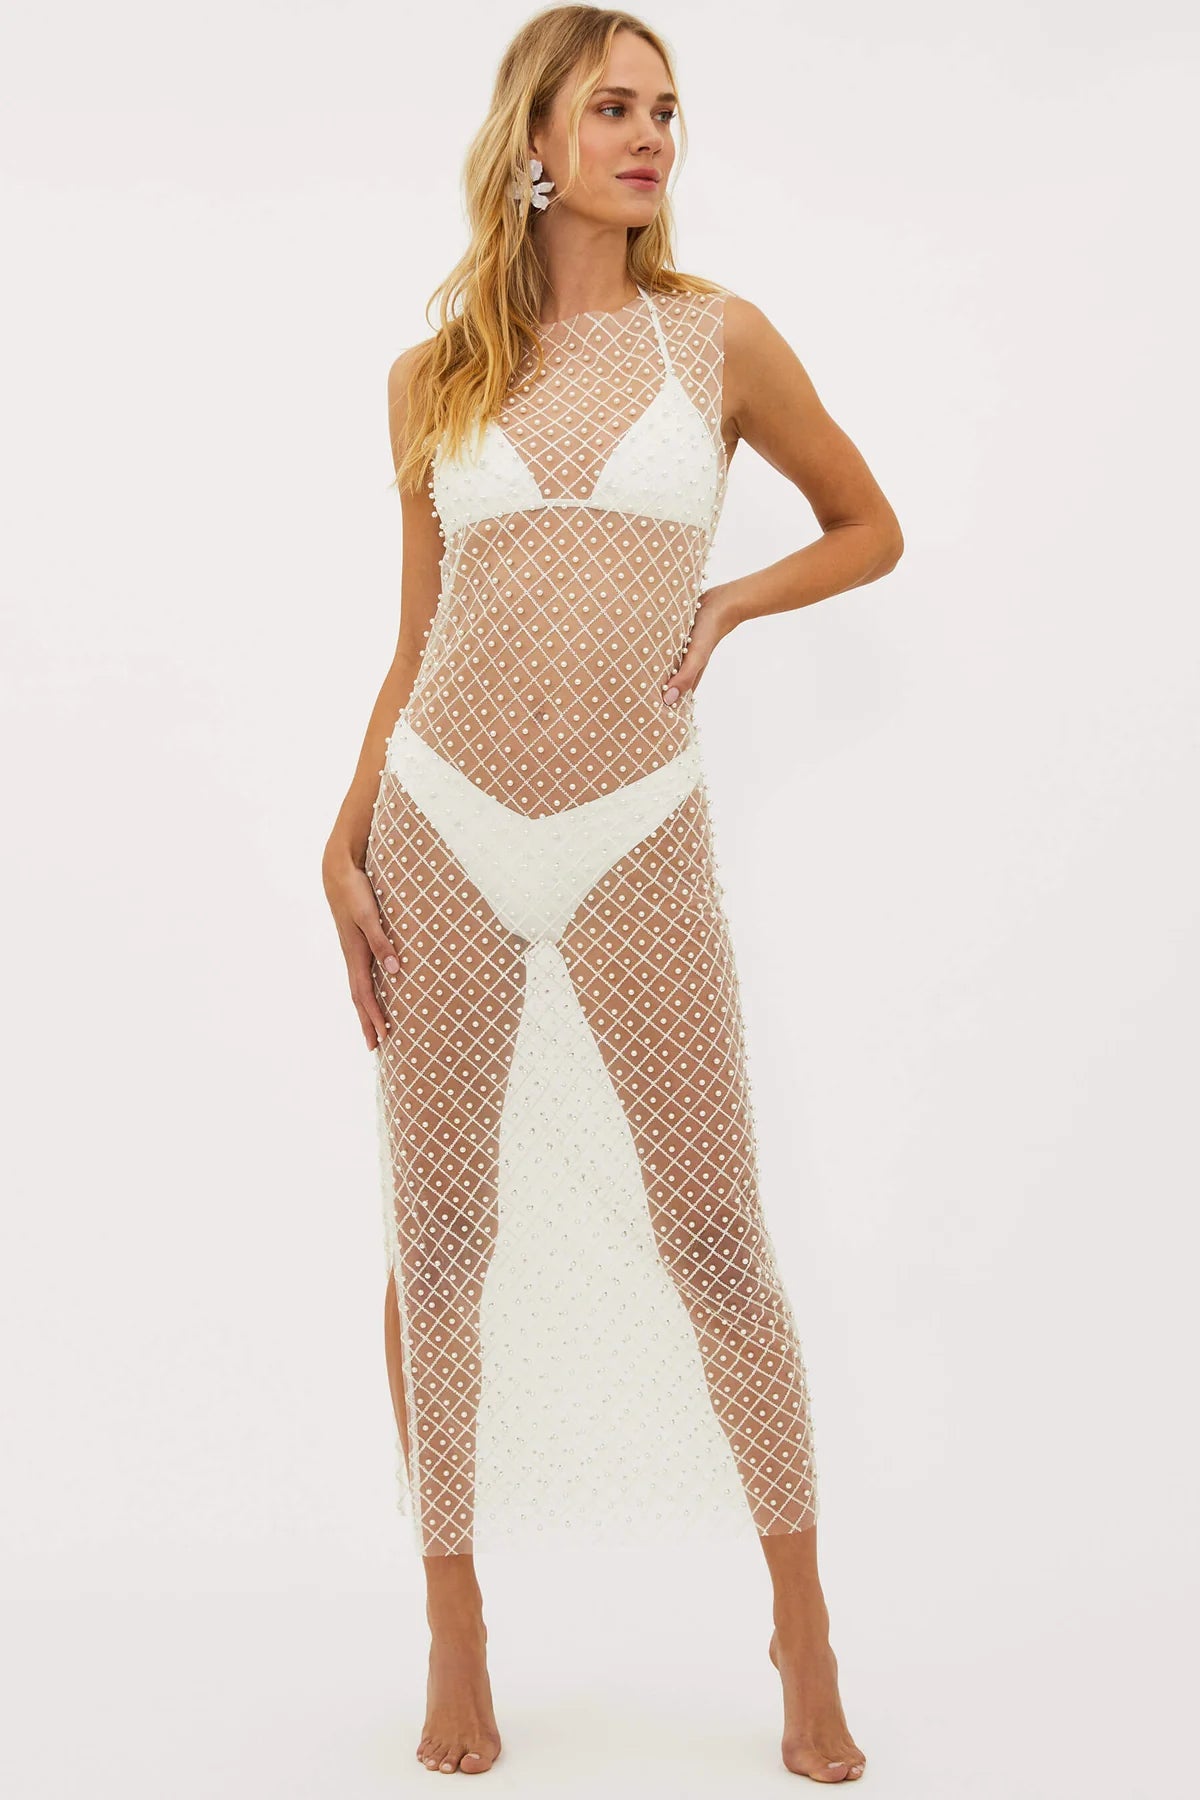 Sheer Pearl Studded Ivory Coverup Dress